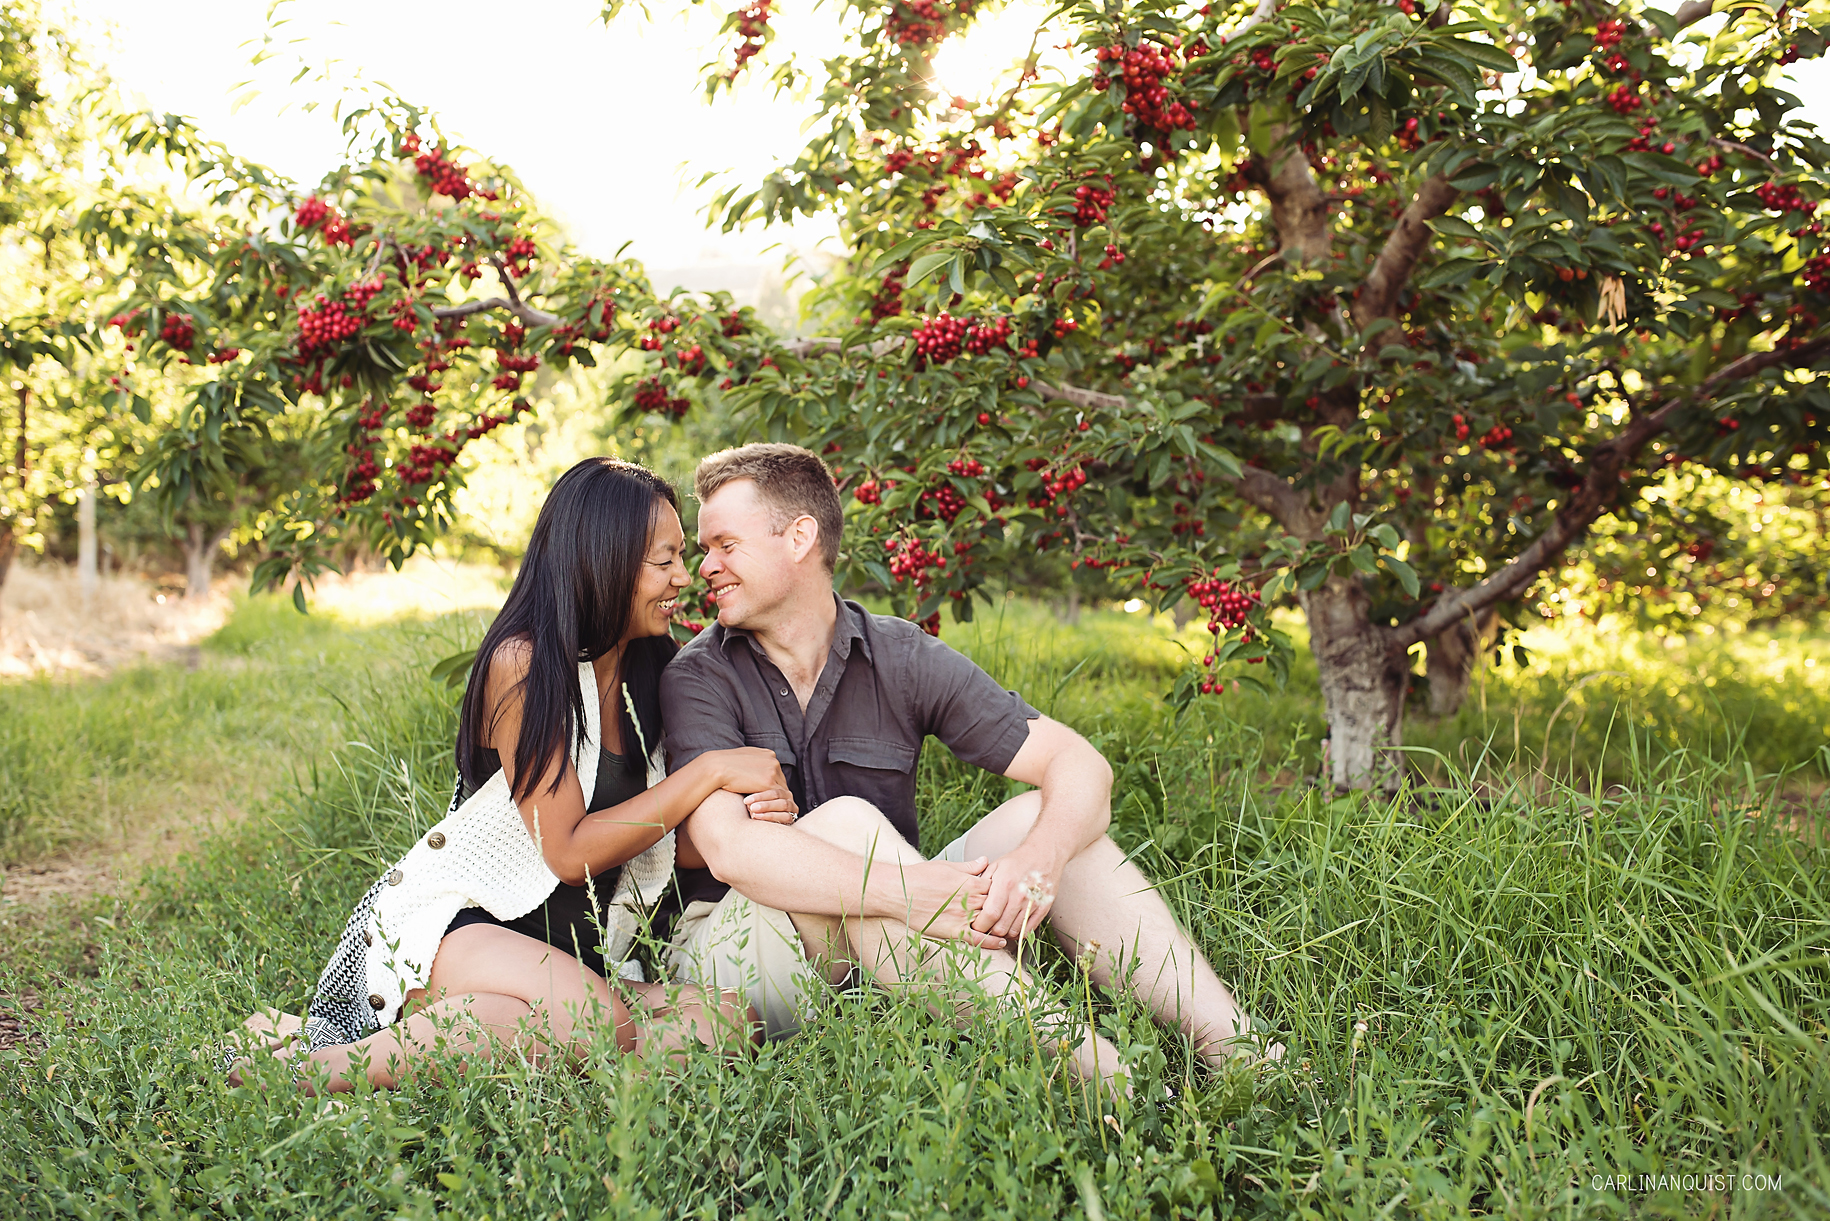 Orchard Engagement Photos | Cherries | Engagement Ring | Carlin Anquist Photography